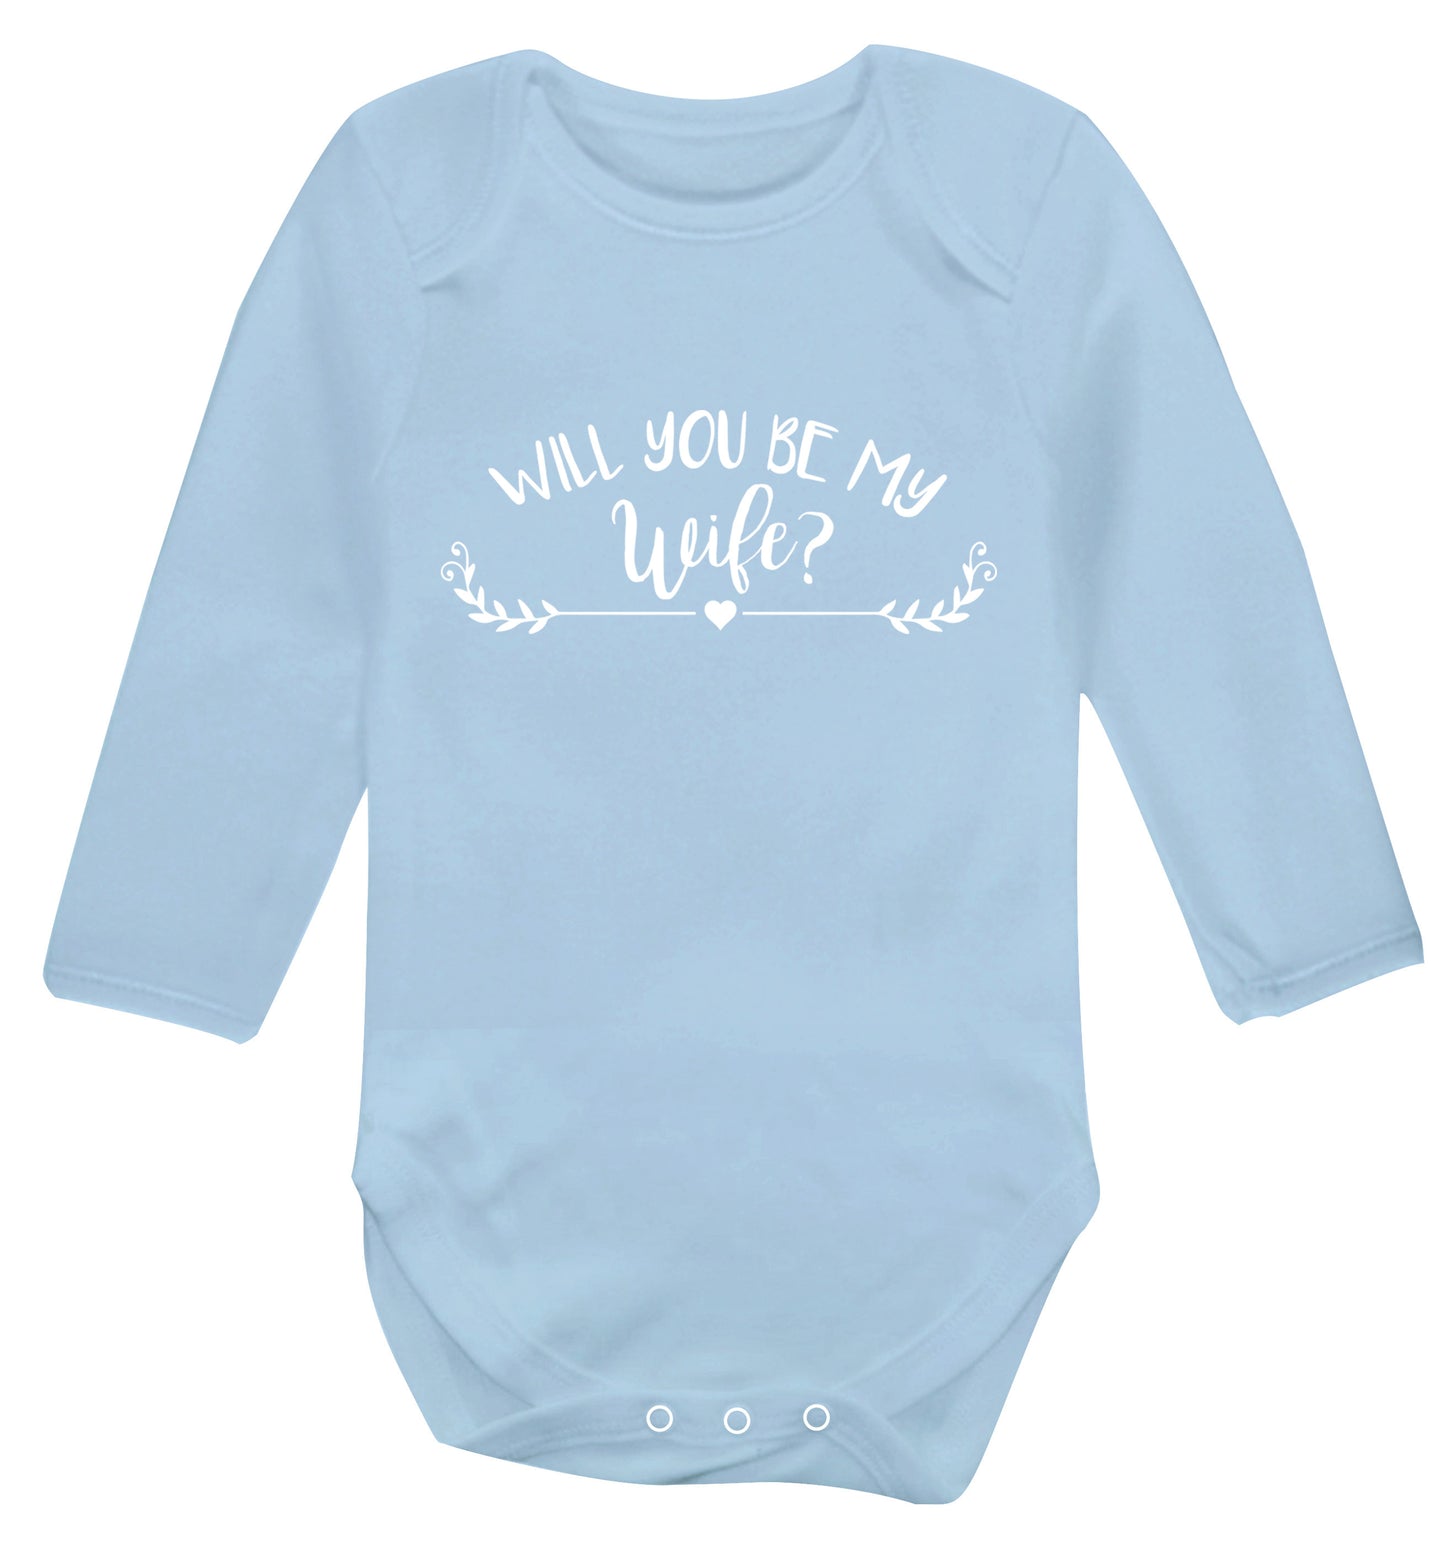 Will you be my wife? Baby Vest long sleeved pale blue 6-12 months